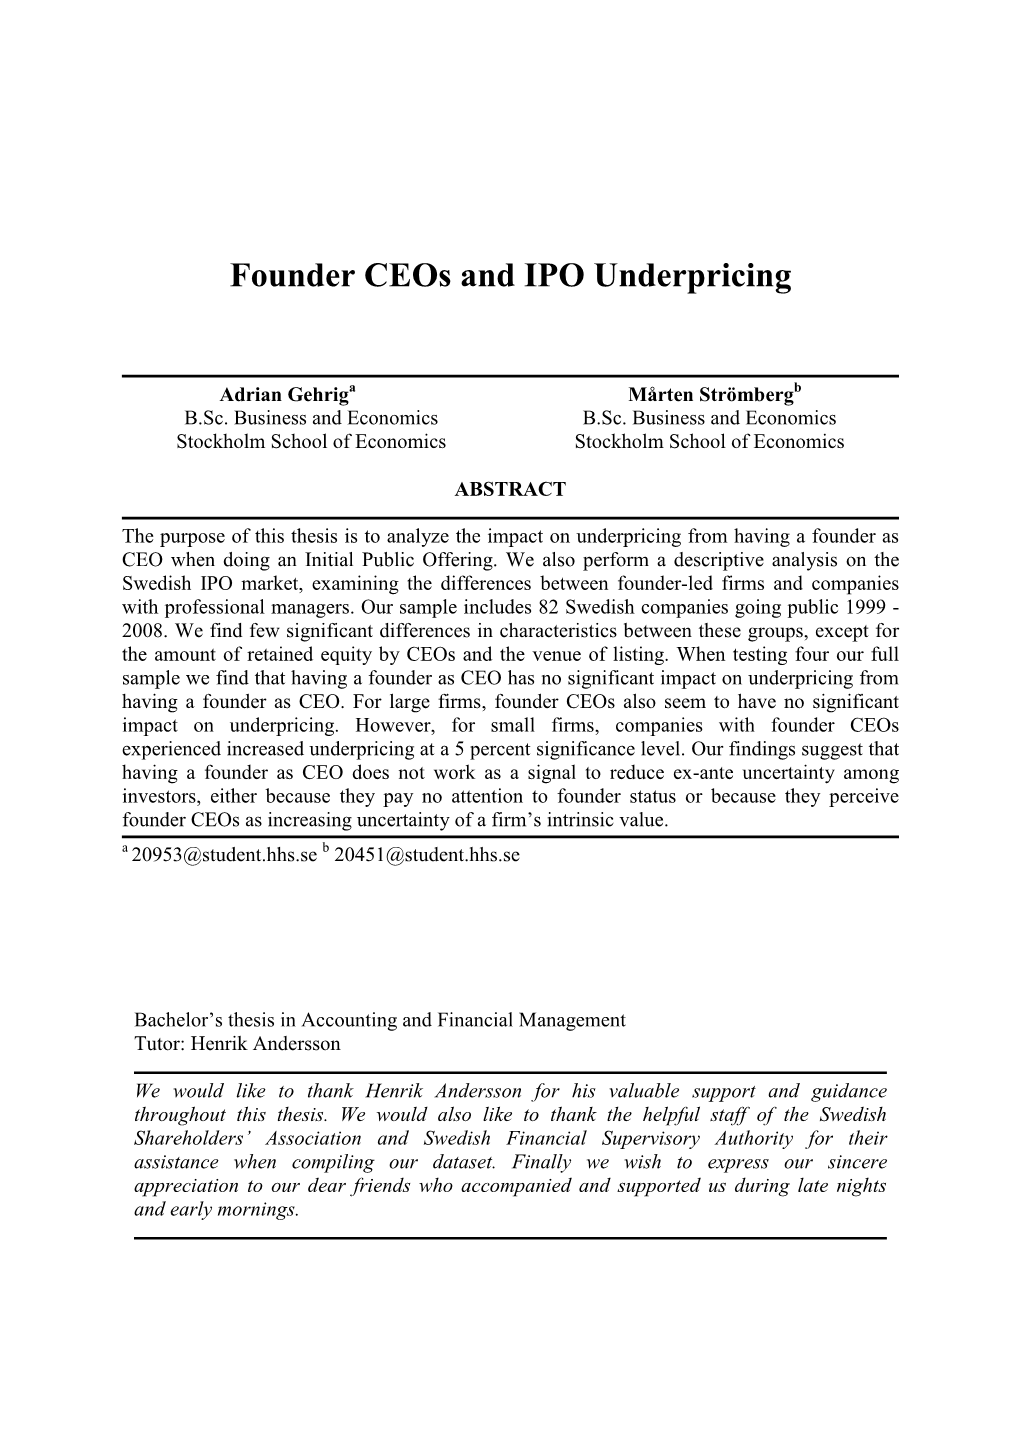 Founder Ceos and IPO Underpricing